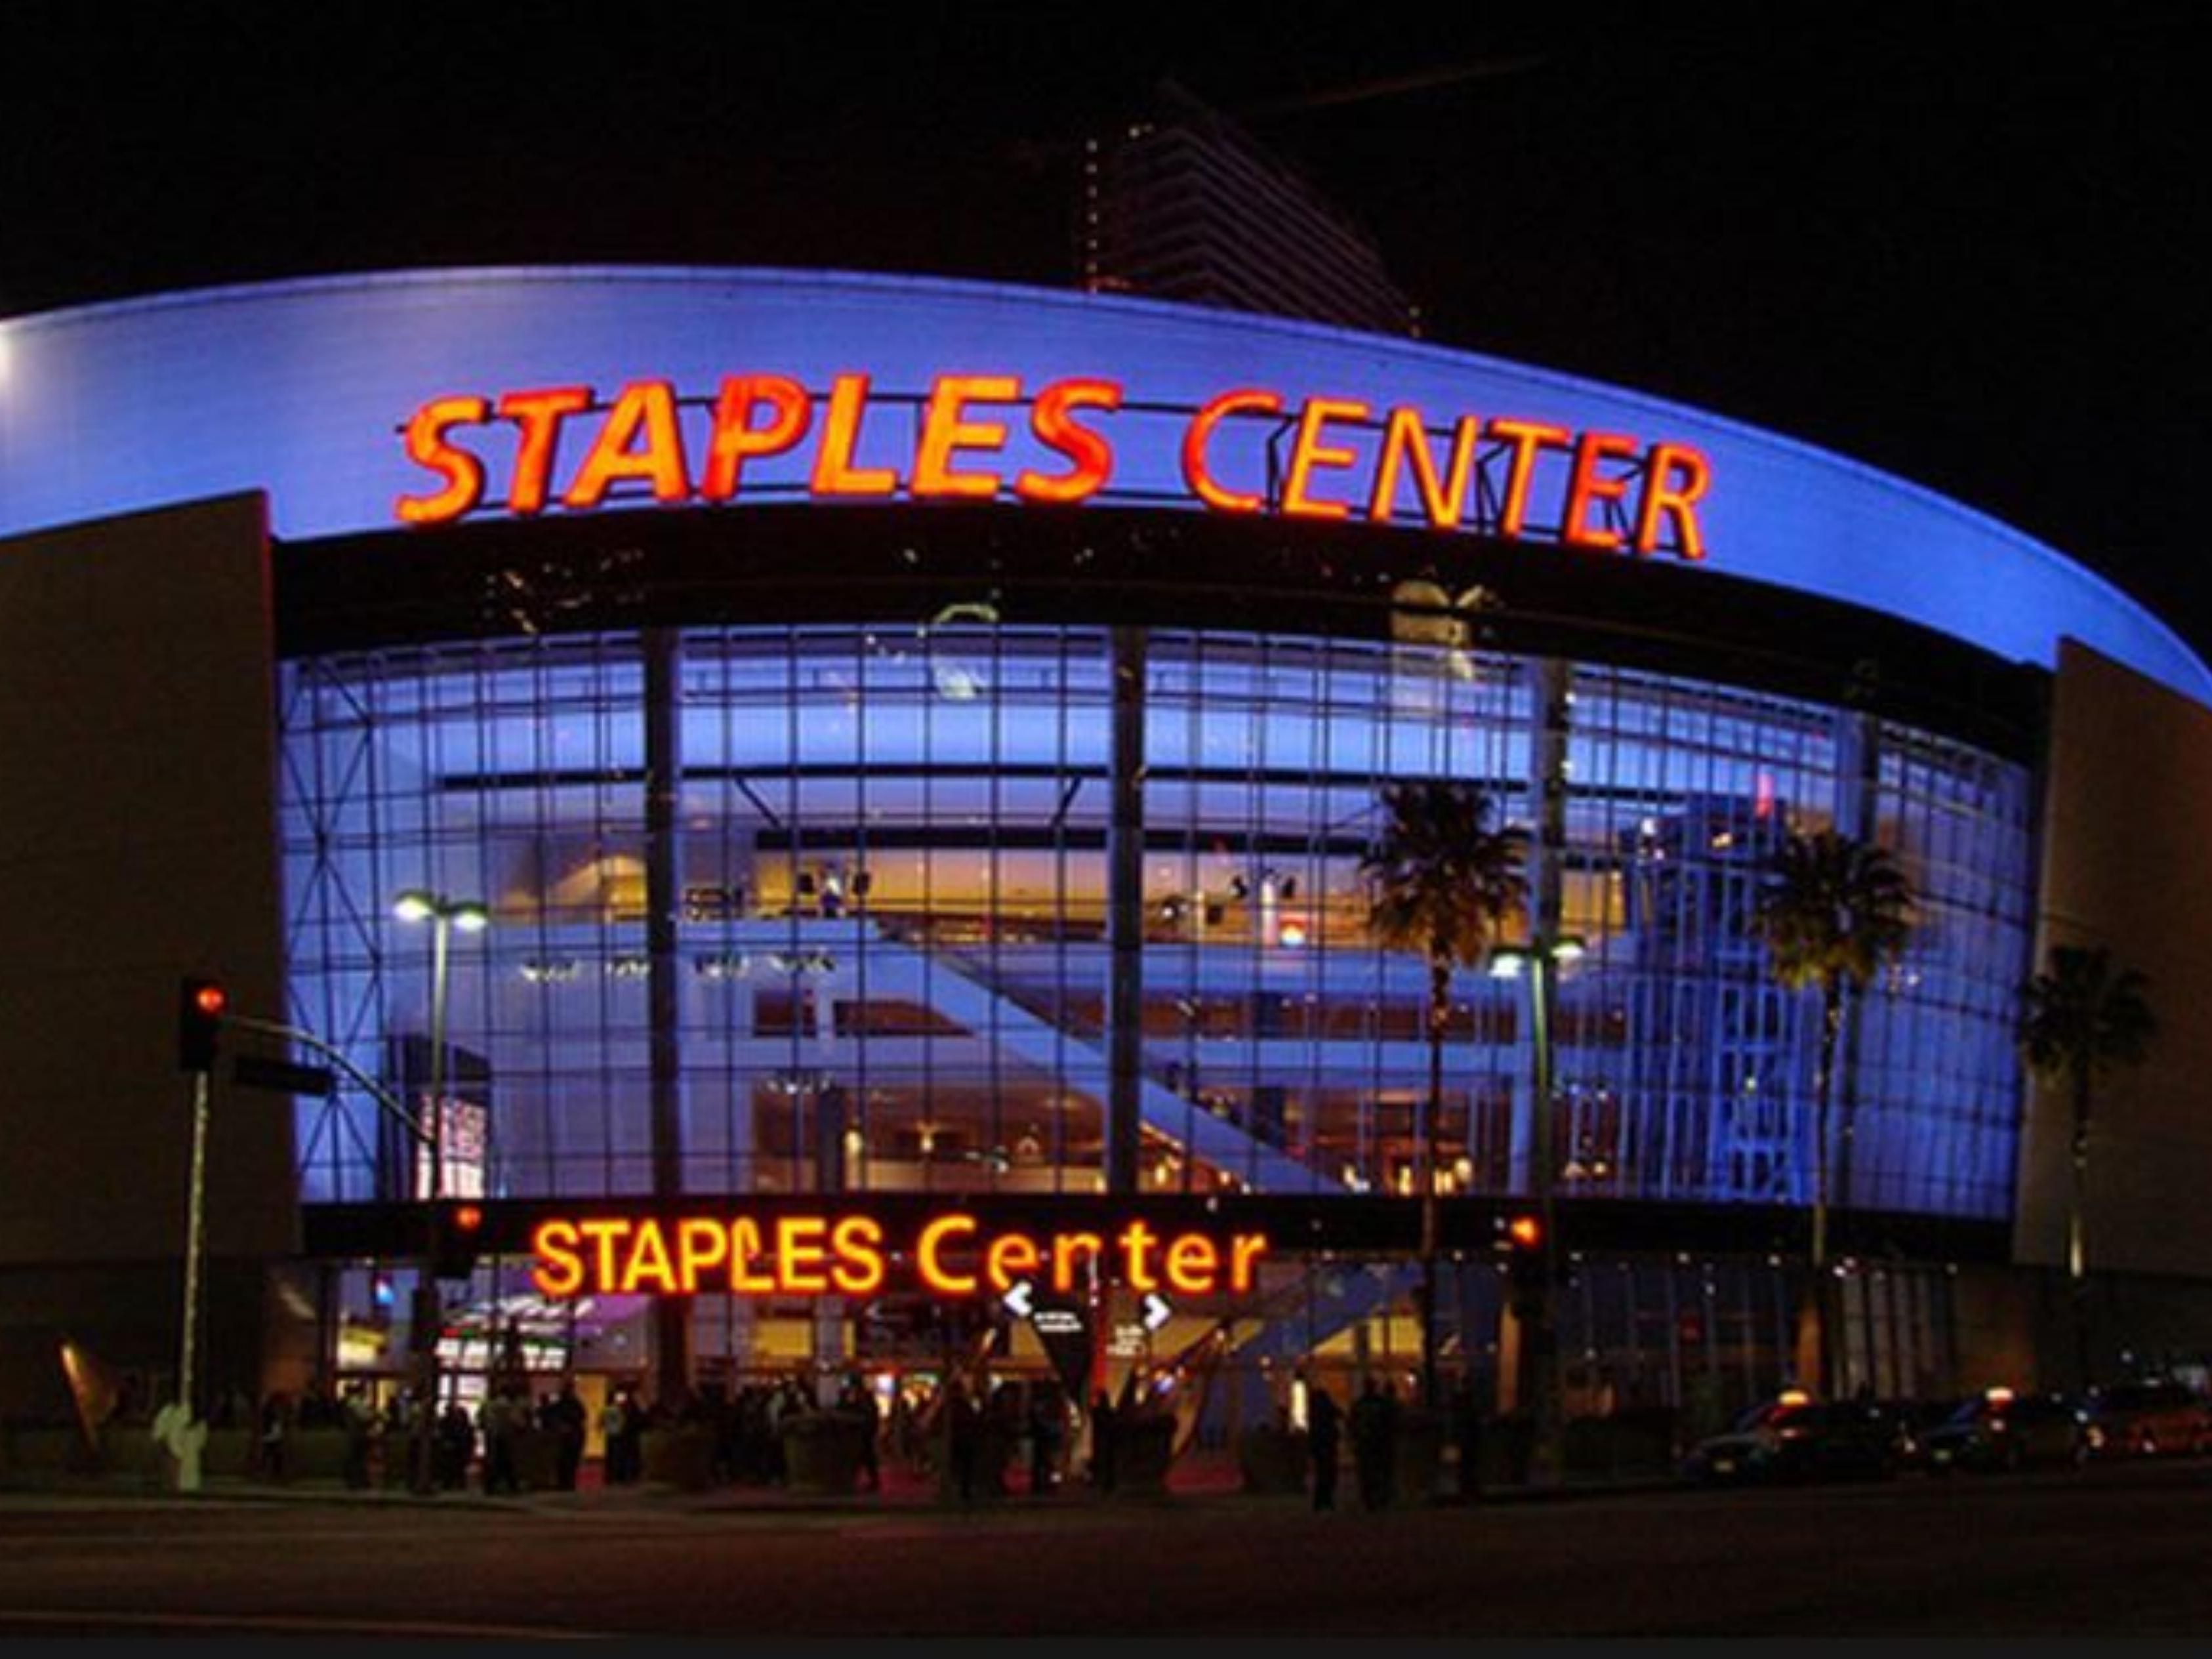 Only 16 miles away, the Staples Center hosts live NBA Basketball and NHL Hockey. They also feature special events and concerts including the Backstreet Boys, Carrie Underwood and KISS all scheduled to perform this year.